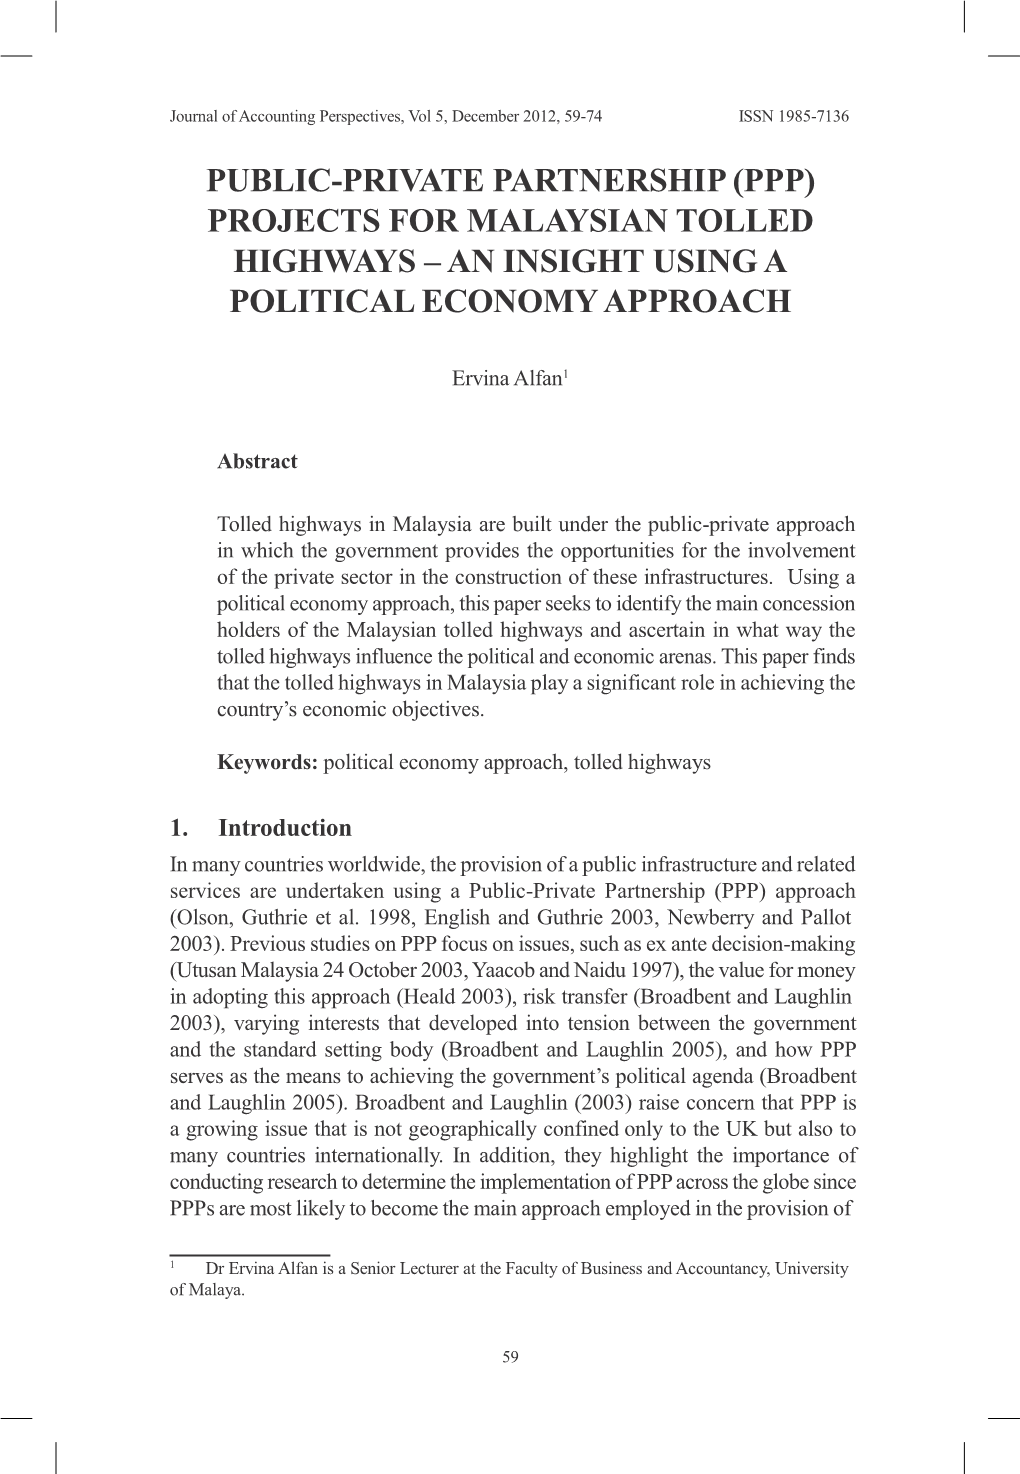 Public-Private Partnership (Ppp) Projects for Malaysian Tolled Highways – an Insight Using a Political Economy Approach